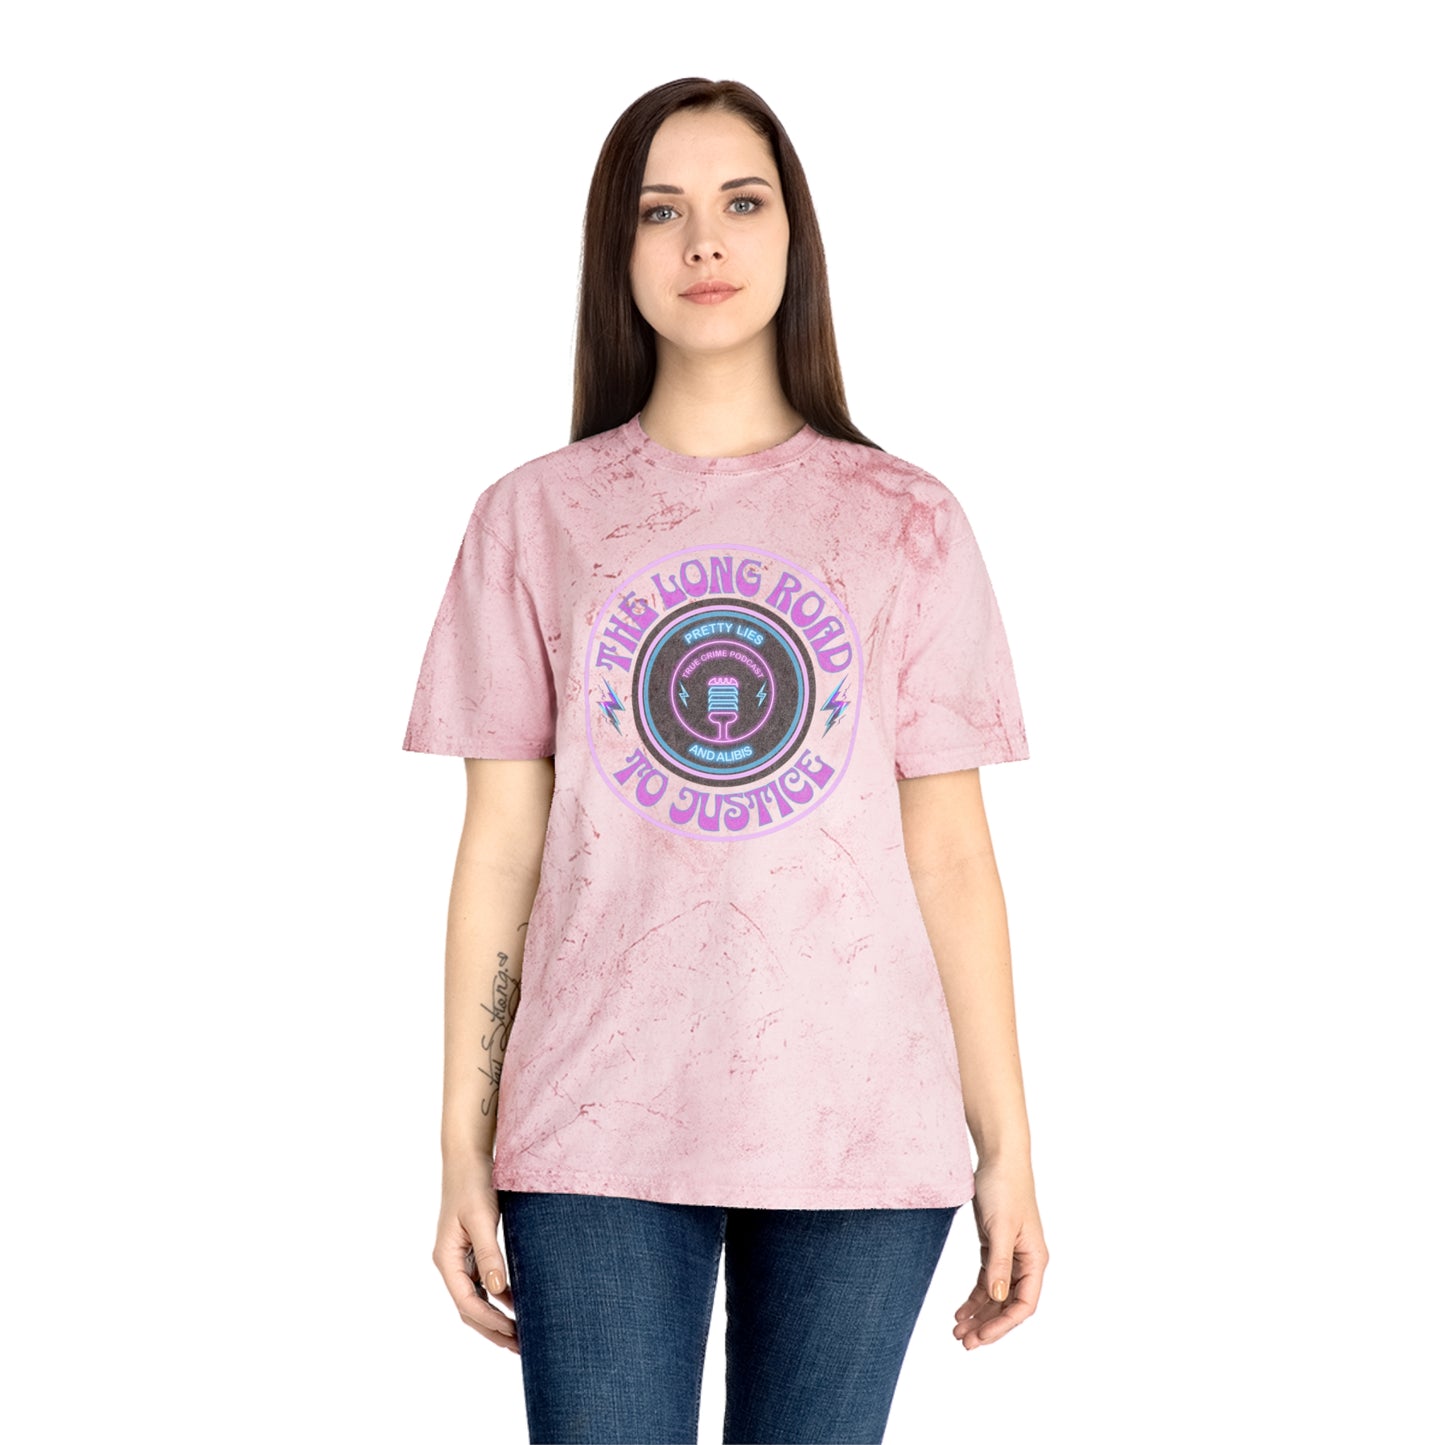 The Long Road To Justice Unisex Color Blast T-Shirt